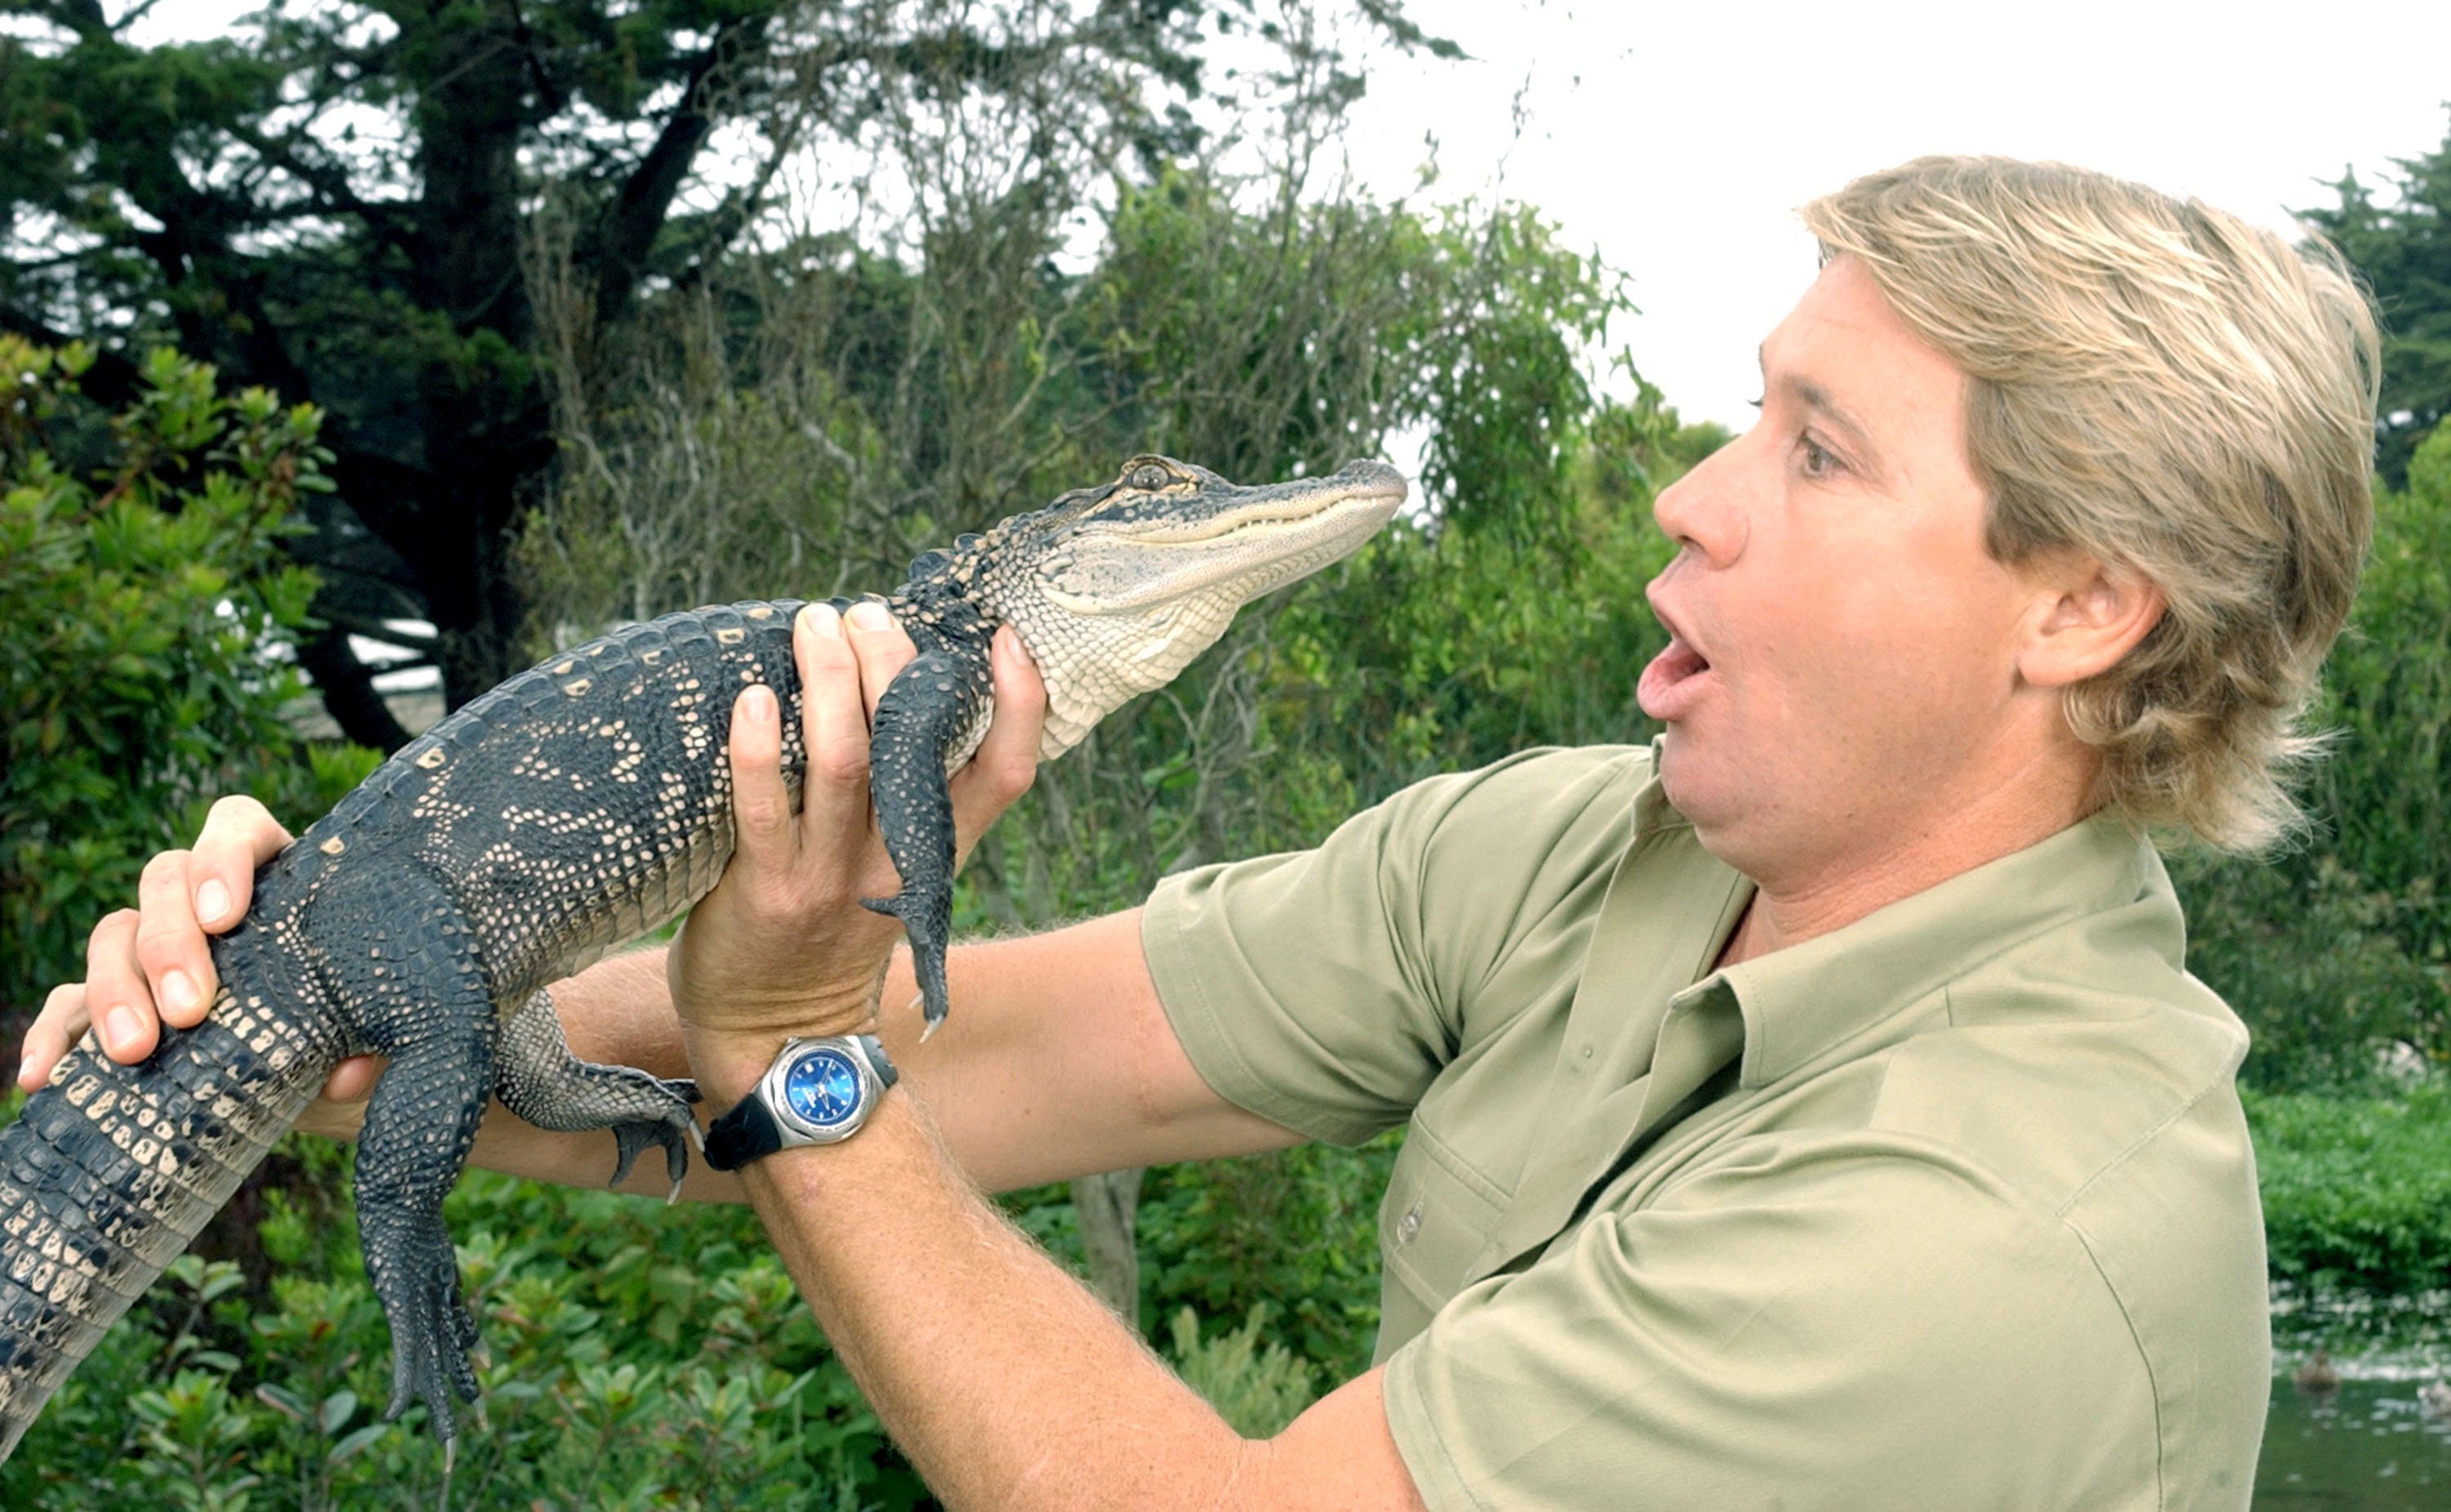 Steve Irwin, poses with a three foot long alligator at the San Francisco Zoo on June 26, 2002 | Photo: GettyImages